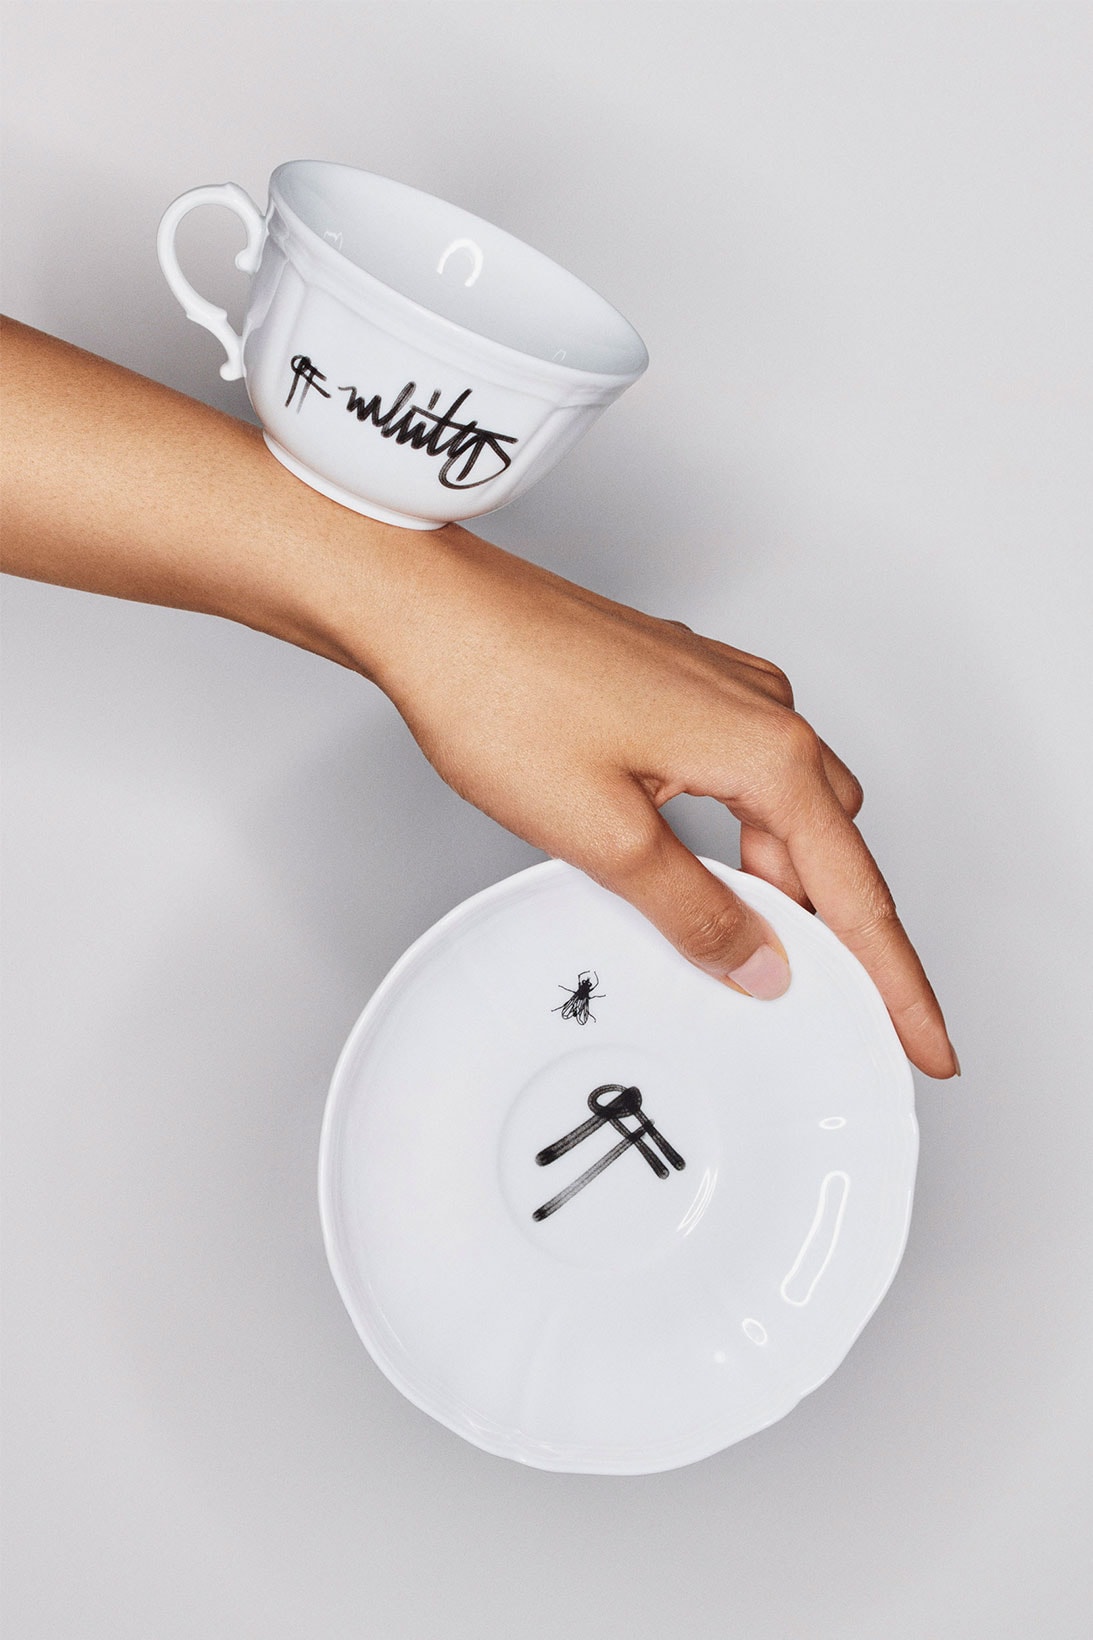 Off-White™x Ginori 1735 collection teacups and saucer